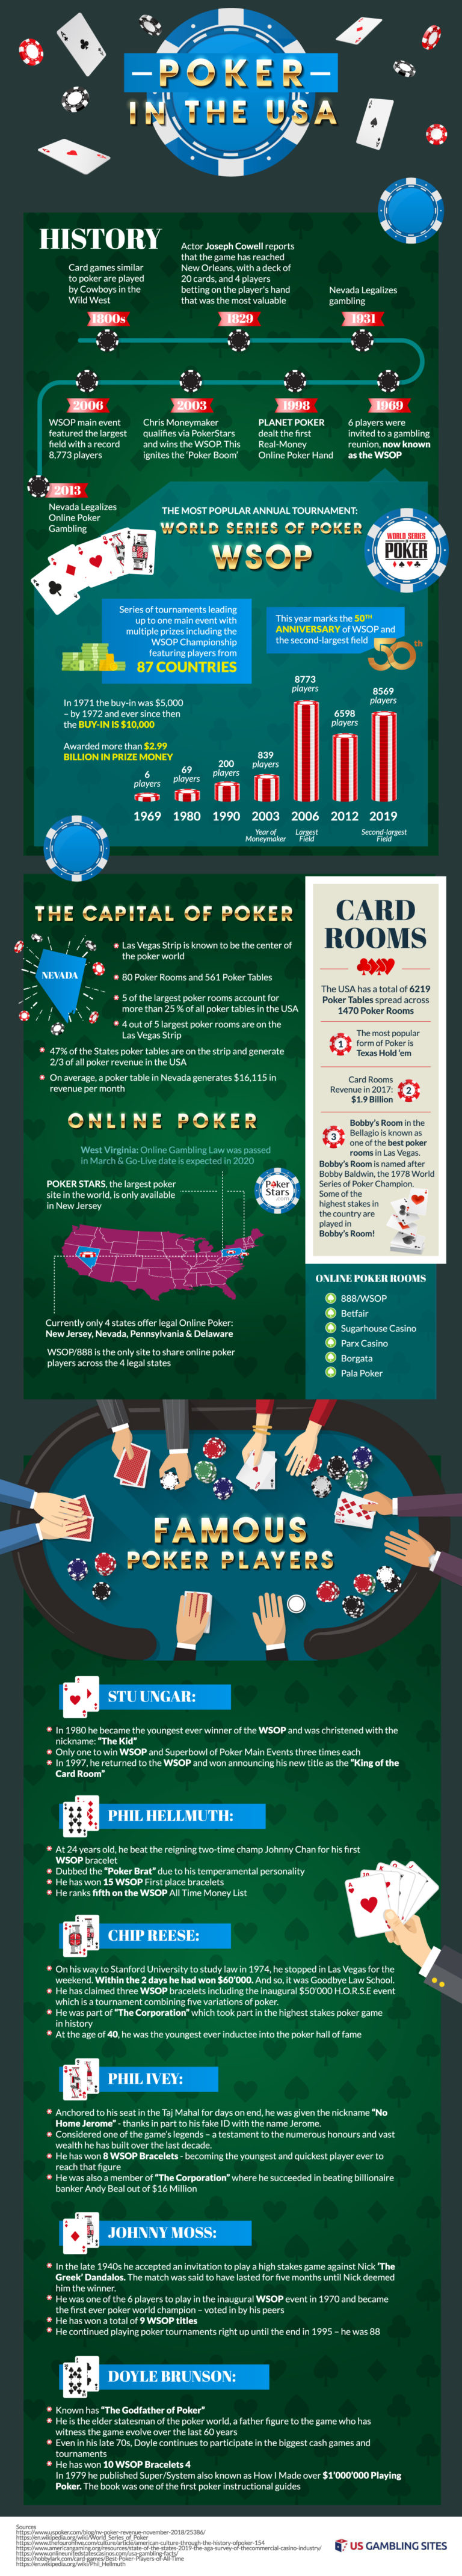 what states is online poker legal